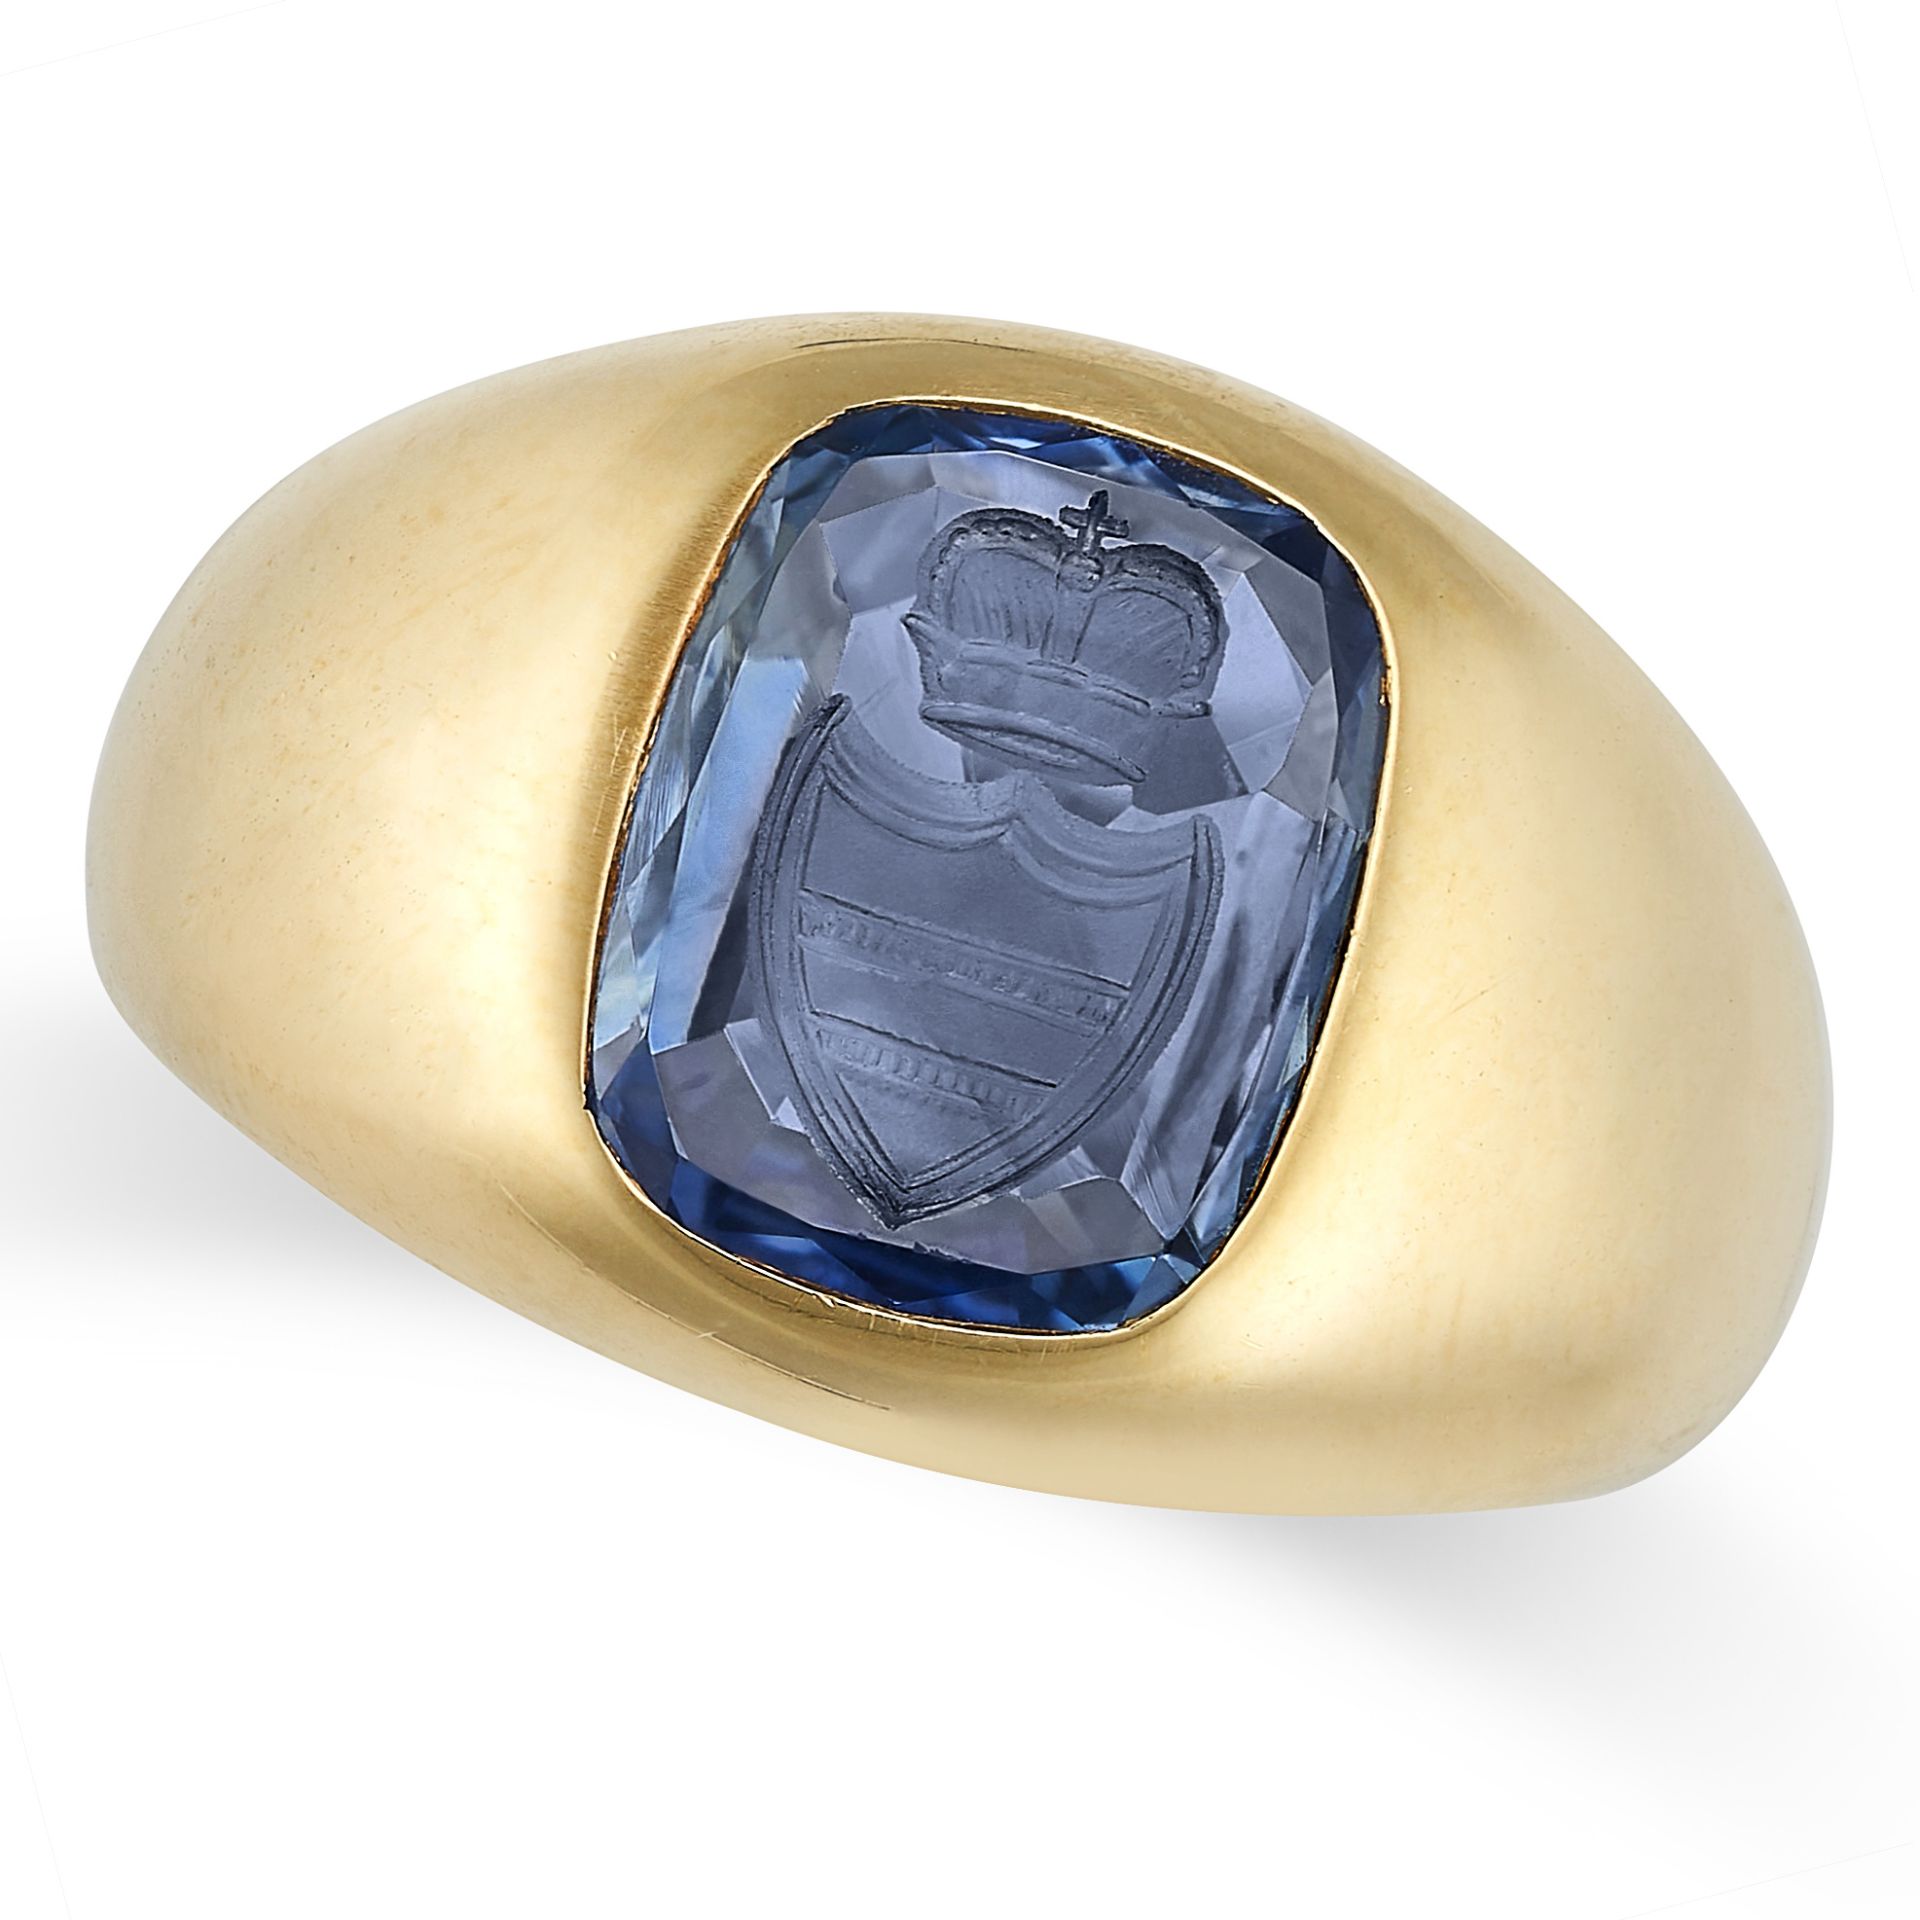 A SAPPHIRE INTAGLIO SEAL GYPSY RING in 18ct yellow gold, set with a cushion shaped sapphire intaglio